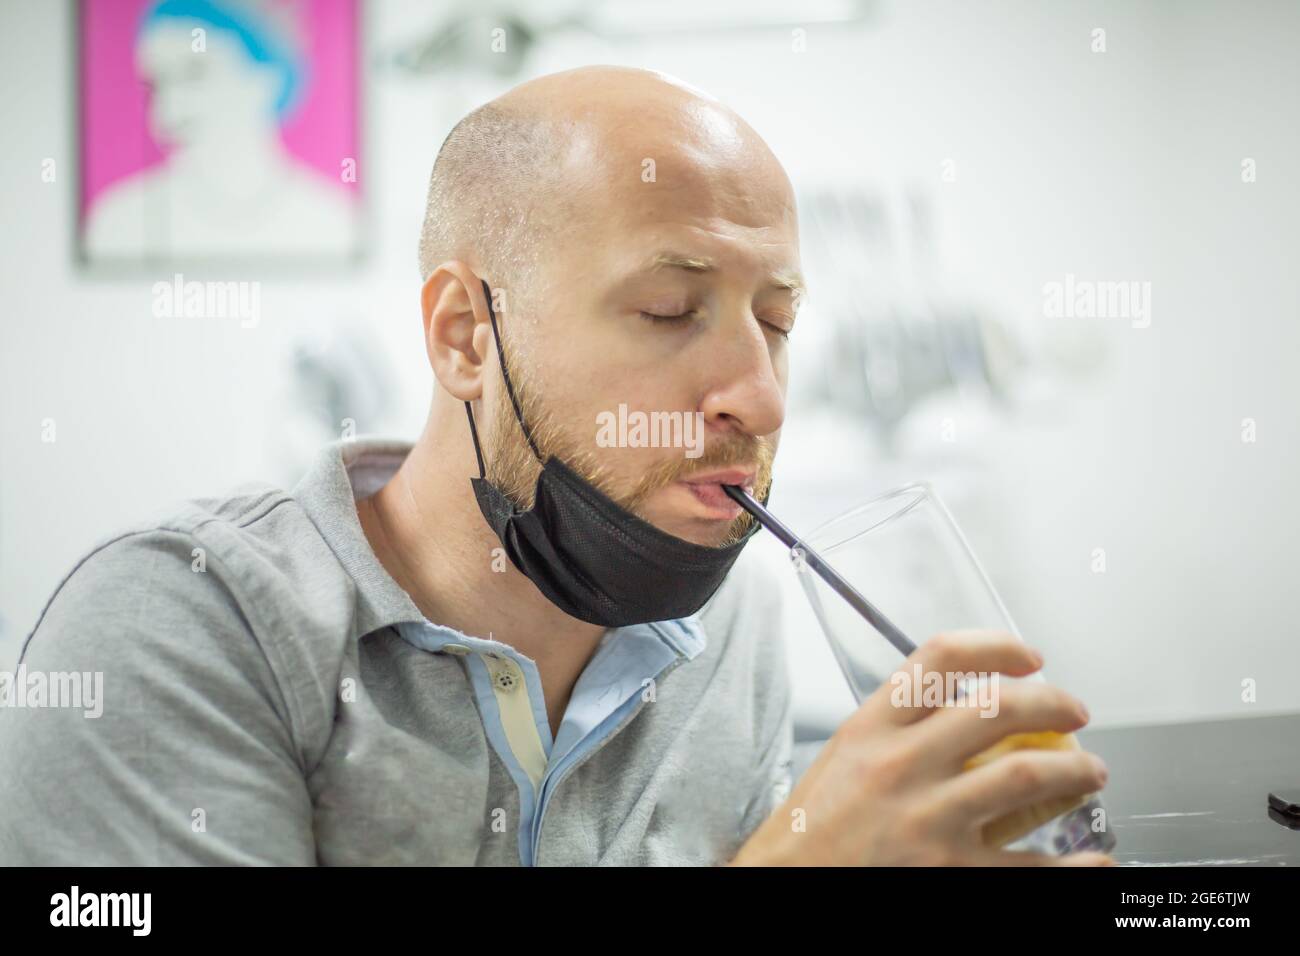 Caucasian male with mask and closed eyes is drinking his long drink with a straw. Stock Photo